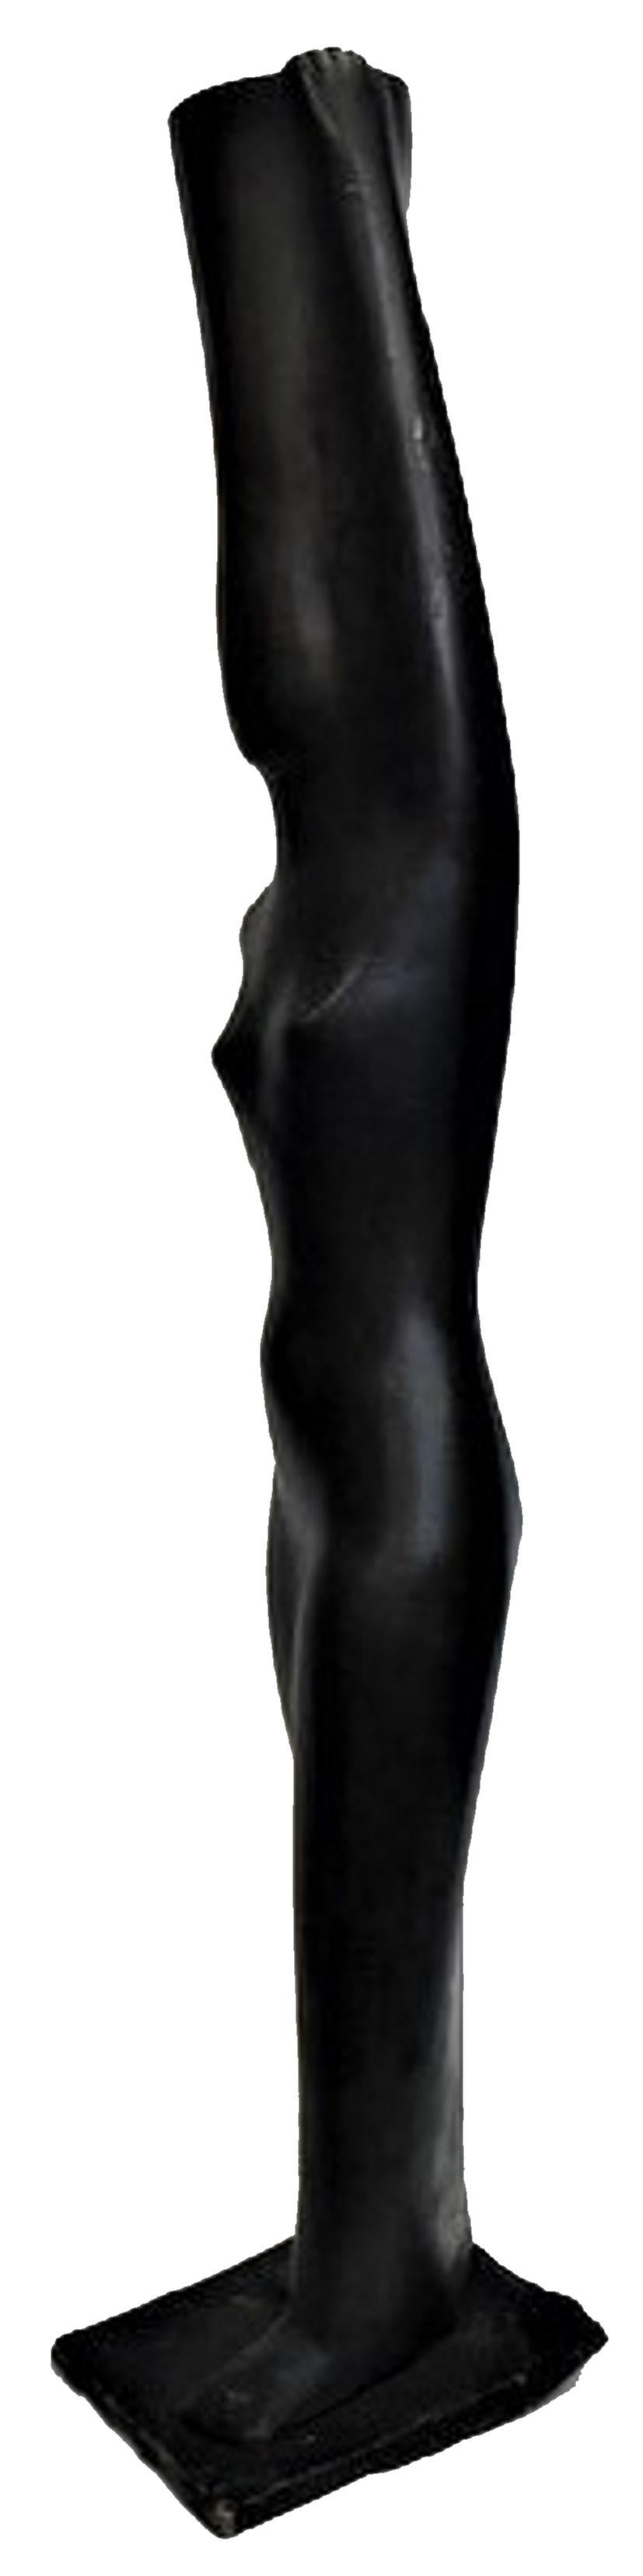 French Modernist Abstract Bronze Sculpture of a Woman Carrying a Vessel, c. 1960 In Good Condition For Sale In New York, NY